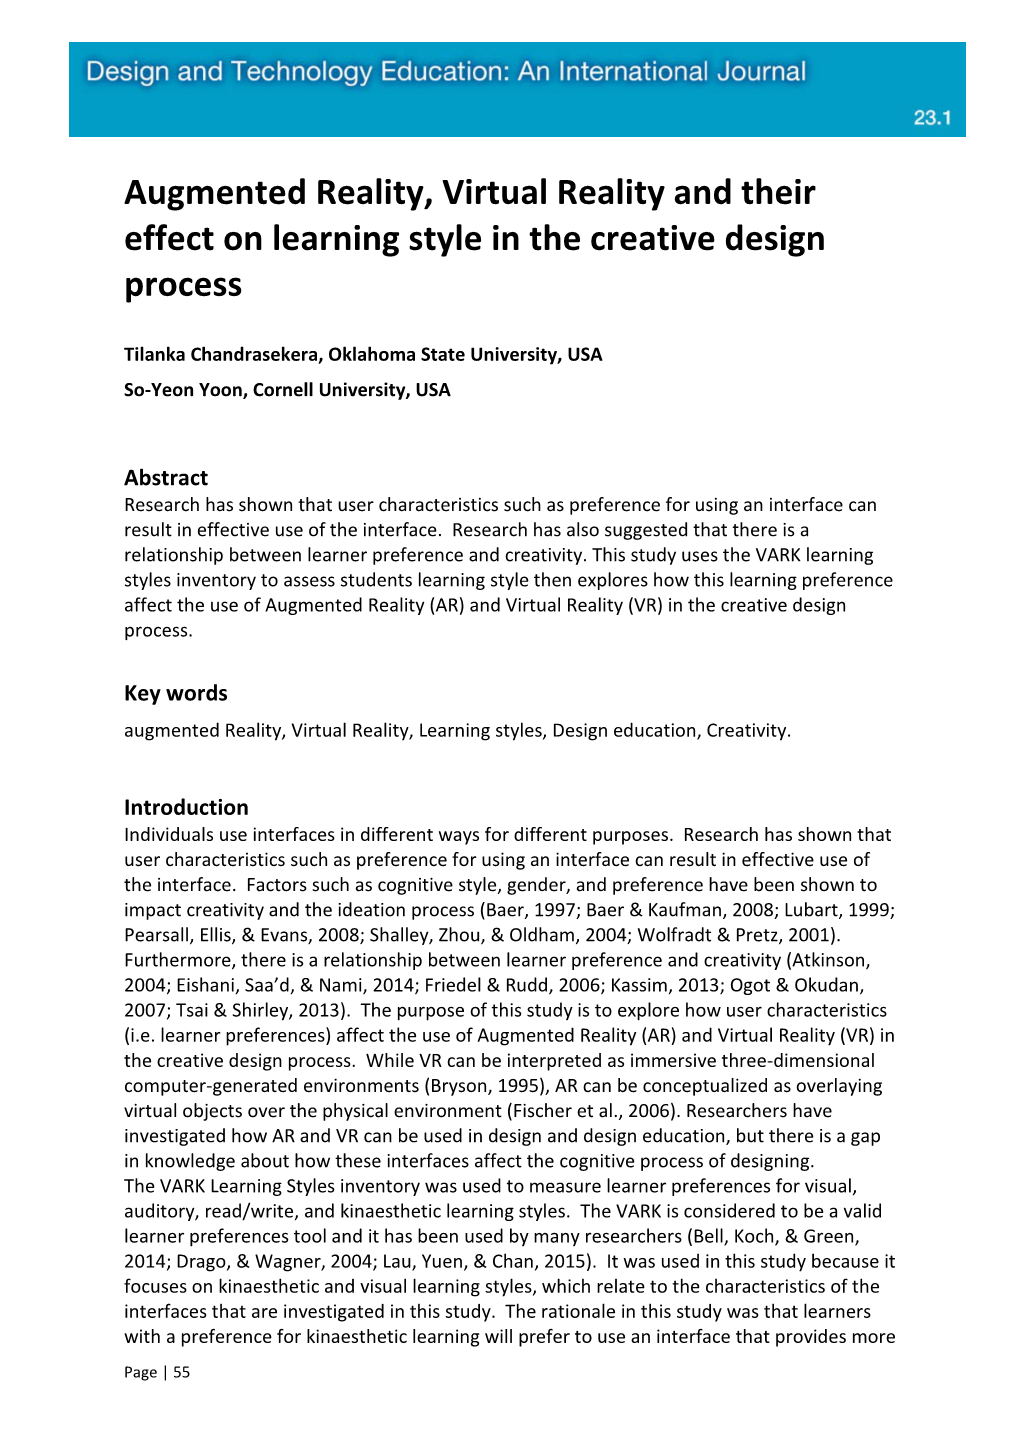 Augmented Reality, Virtual Reality and Their Effect on Learning Style in the Creative Design Process